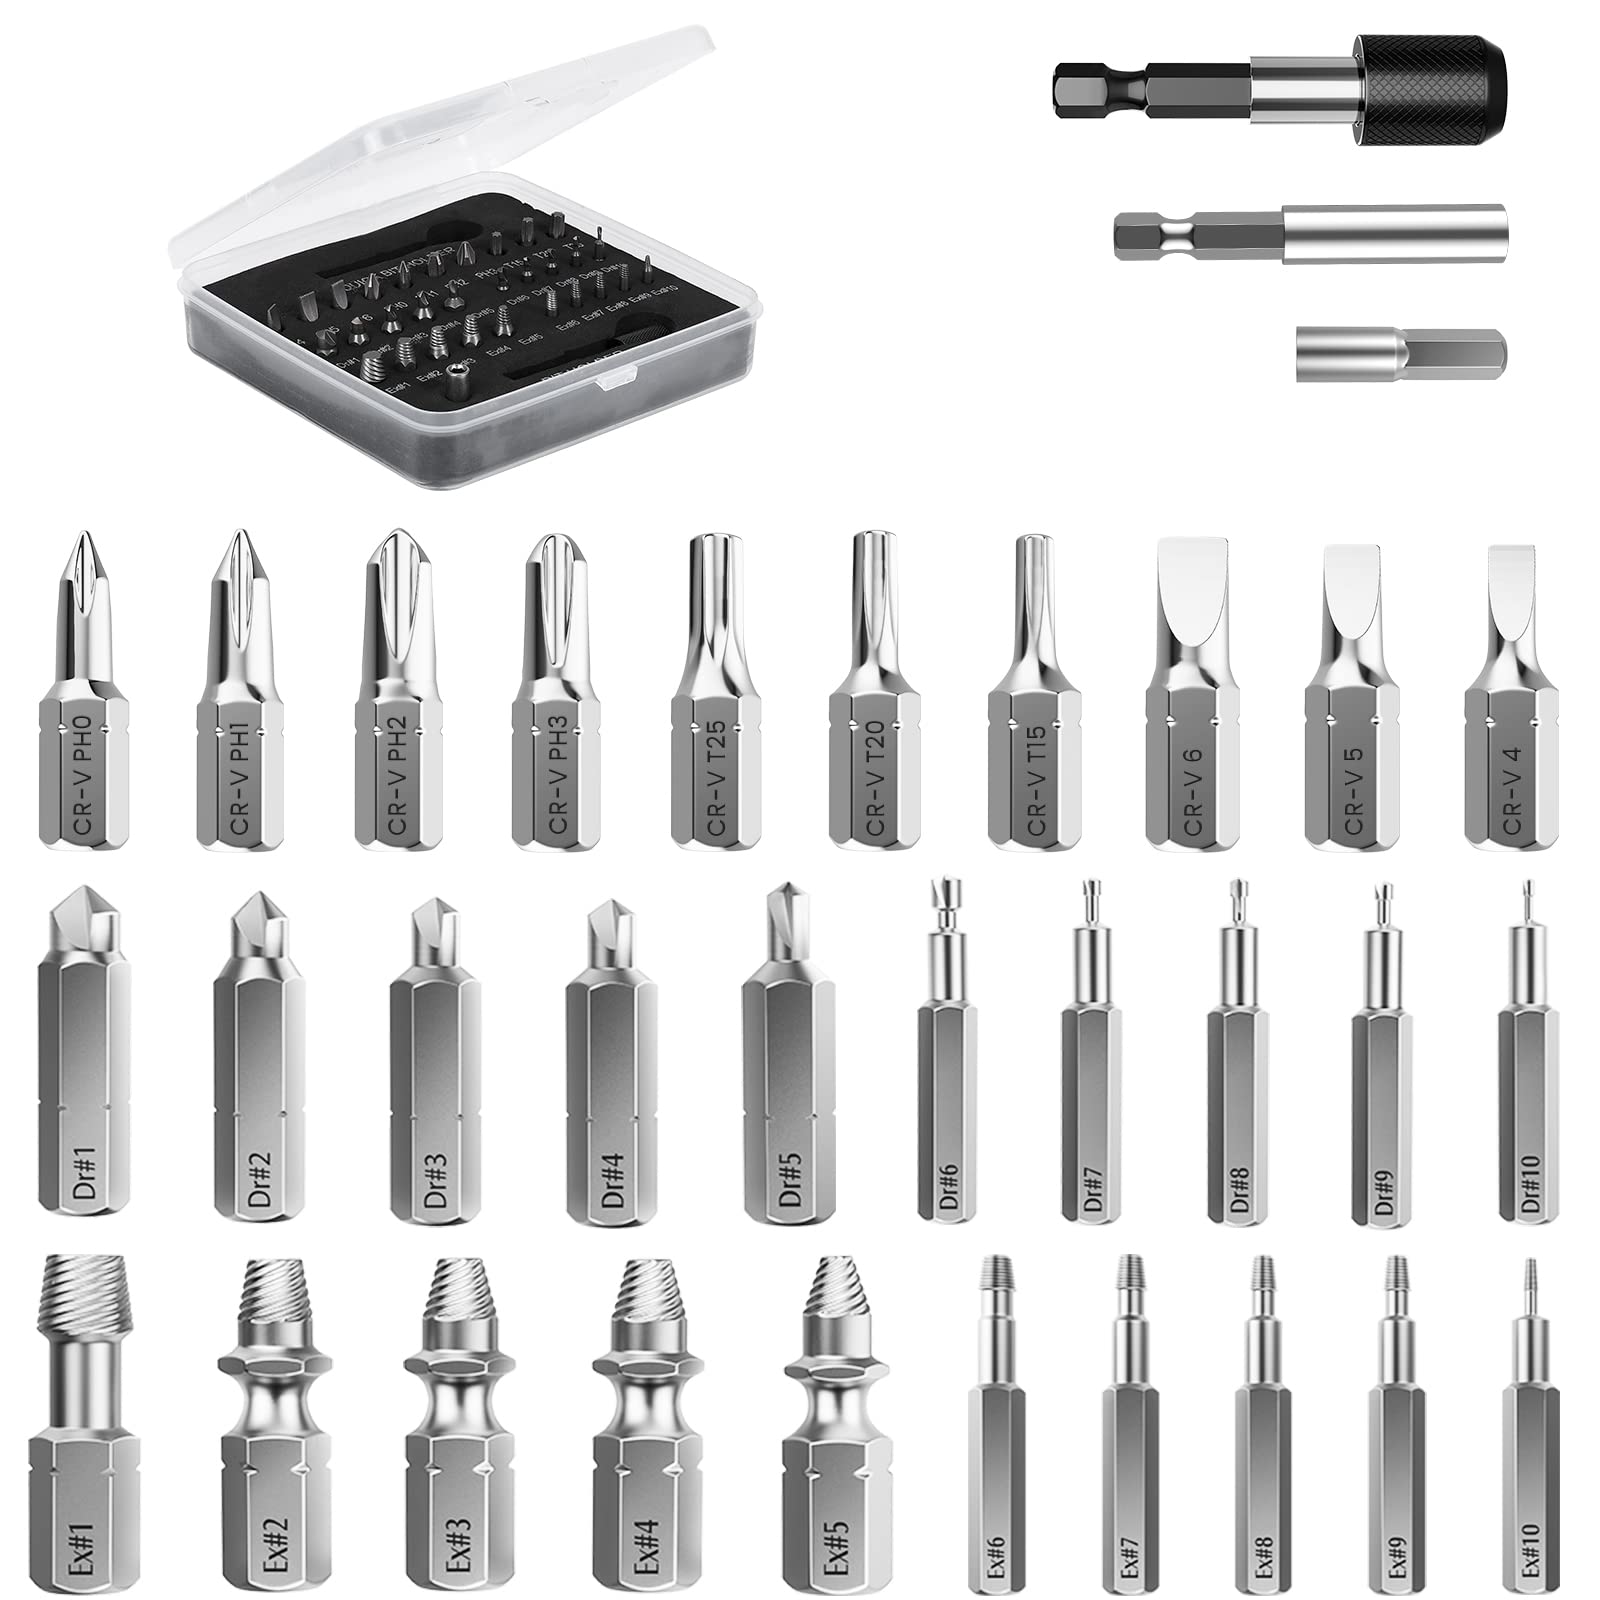 &#128310;【Upgraded Version】: In addition to 10 different sizes of drills and extractors, 3 slotted screws, 3 Torx screws, 4 Phillips screws and 1 quick bit holder have been added, which make them compatible with all kinds of drills and remove any type of screws and bolts.&#128310;【Premium Quality】:It is made of quality high speed alloy steel 4341, high strengthen and durable, which ensures it is tough enough to easily remove those damaged screws and make your work more efficiently.&#128310;【Easy Operation】: Two simple steps to remove all stuck screws or bolts in a few seconds. Step One to choose a drill bit smaller than the damaged screw, Step Two to use the same size extractor to take out reversely use your electric hand drills.&#128310;【Portable & Well-packaged】: Comes with a little storage tool box to ensure you will not lose any one of them. What's more, you can take it anywhere with you.&#128310;【Warm Tips】: Using the eletric hand drill and in low speed when stripping the damaged screw can avoid getting hurt.